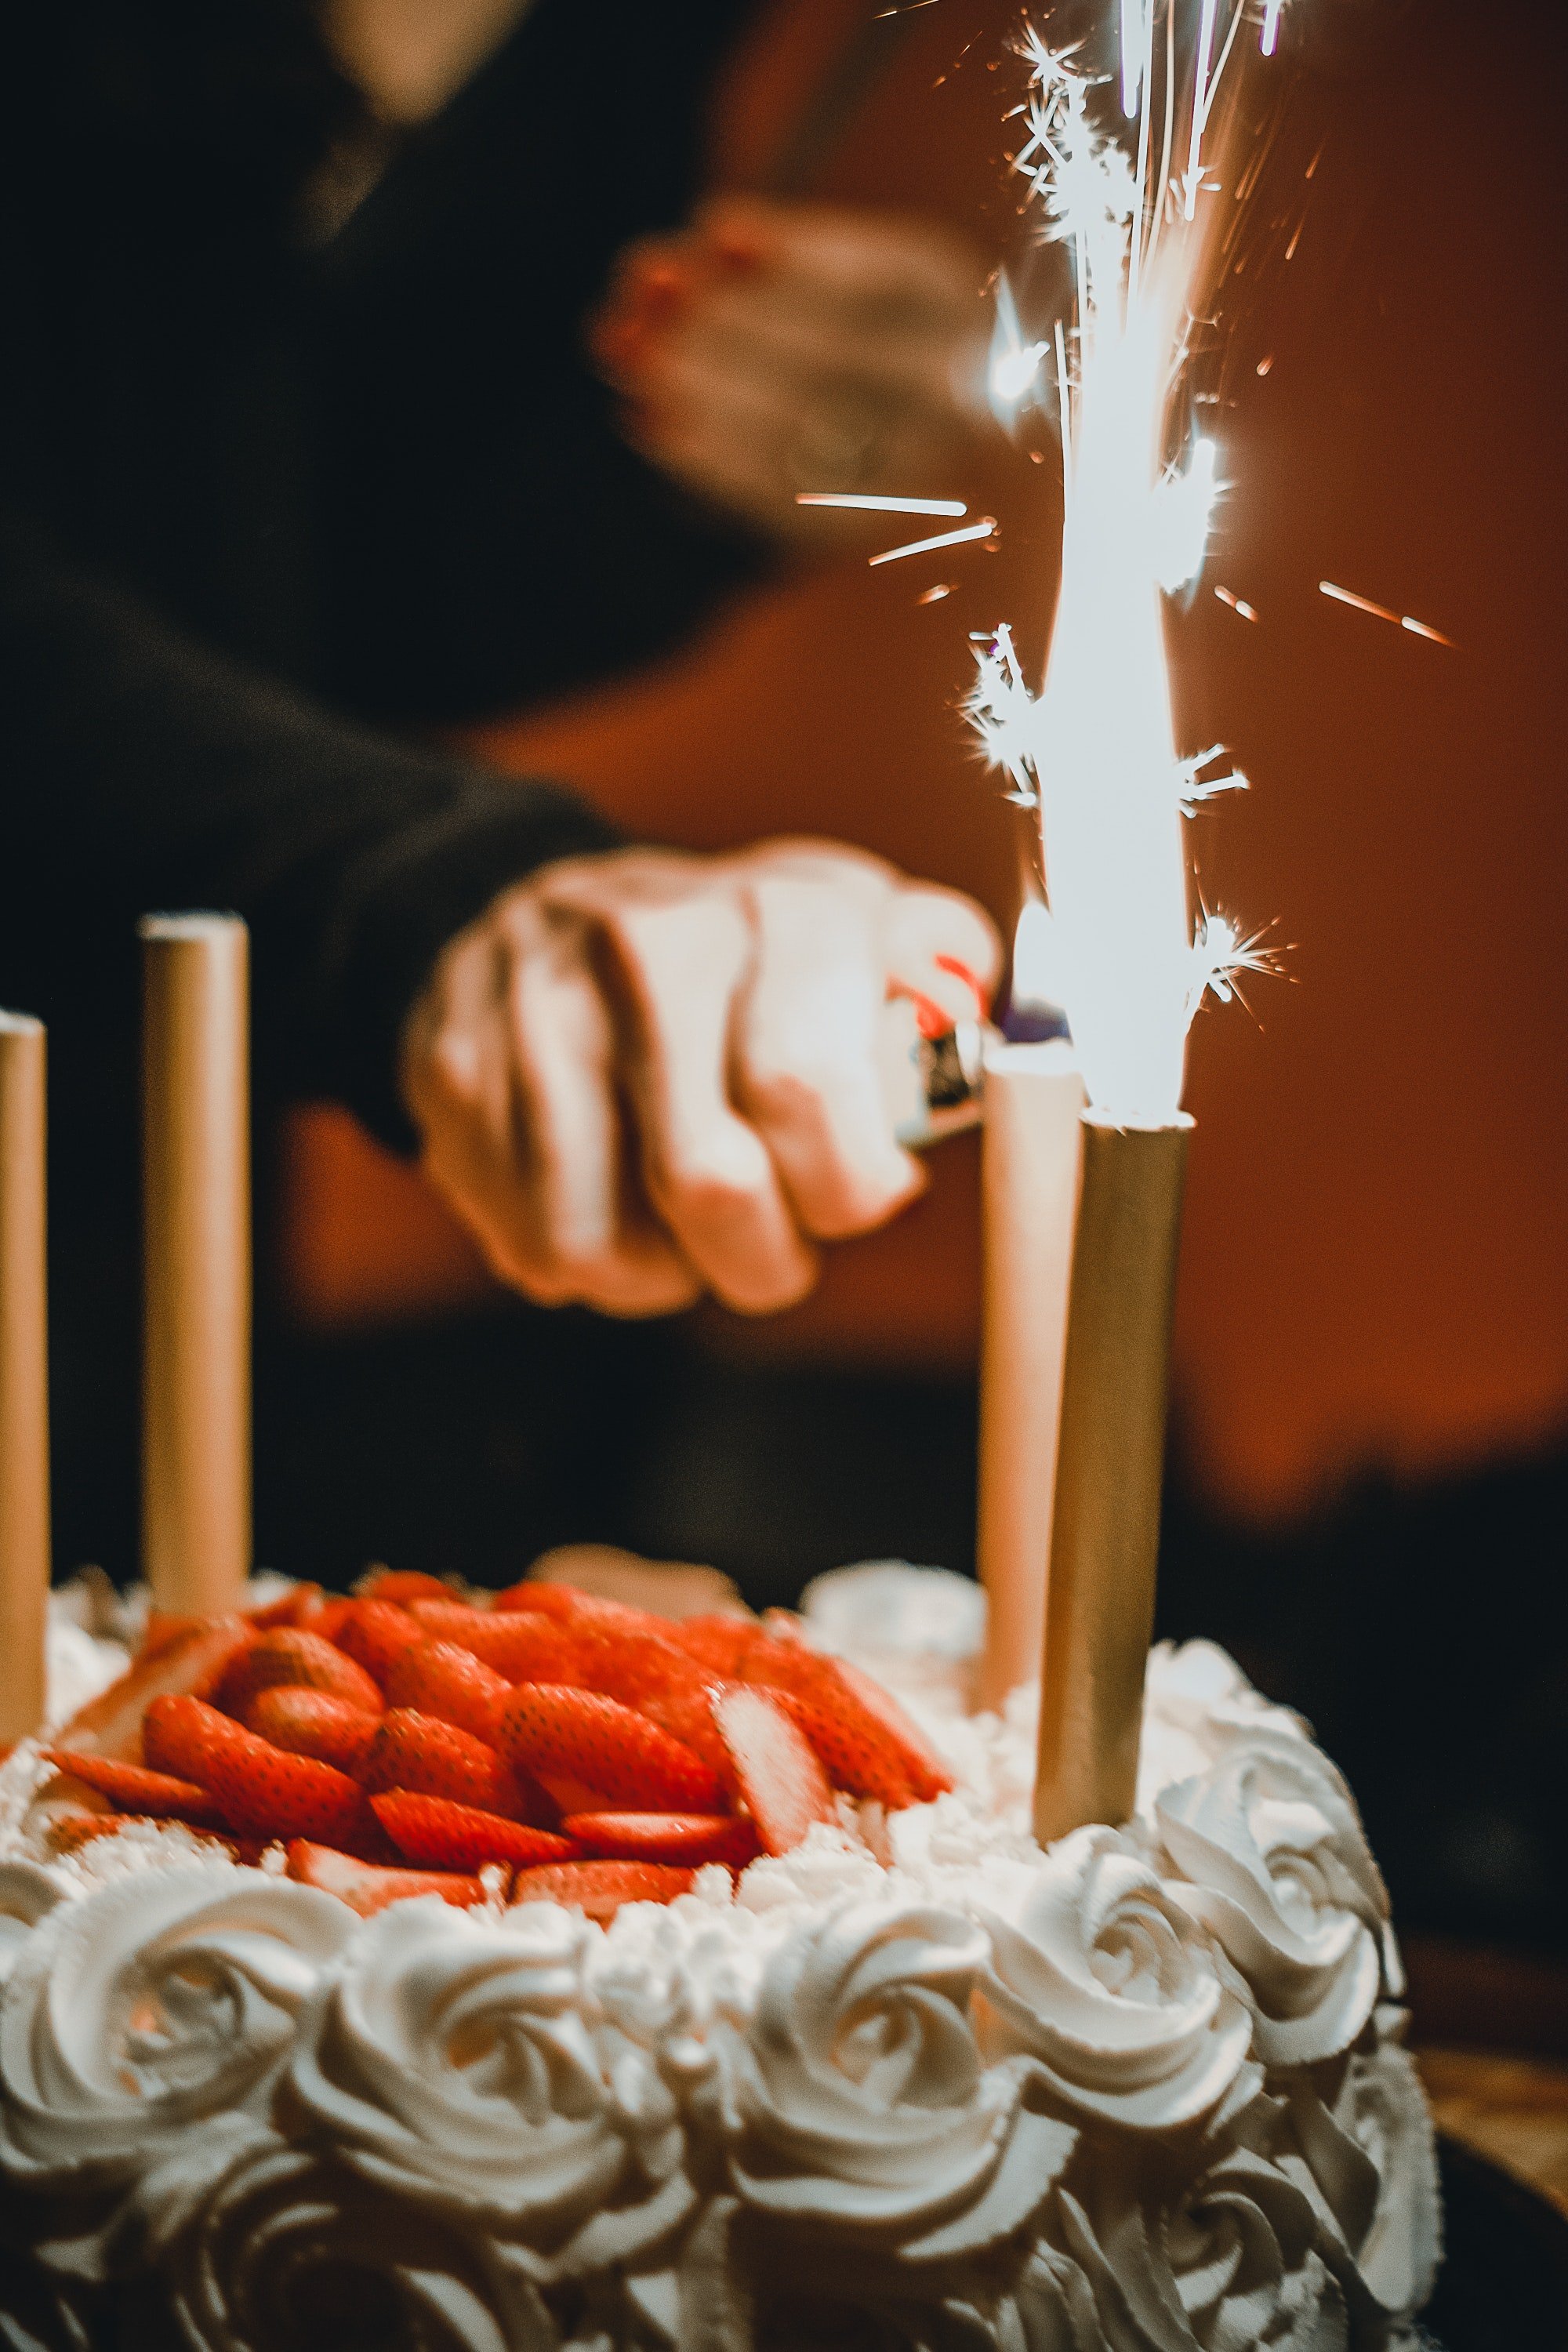 Lucia brought the cake, and they sang "Happy Birthday" at the court. | Source: Pexels